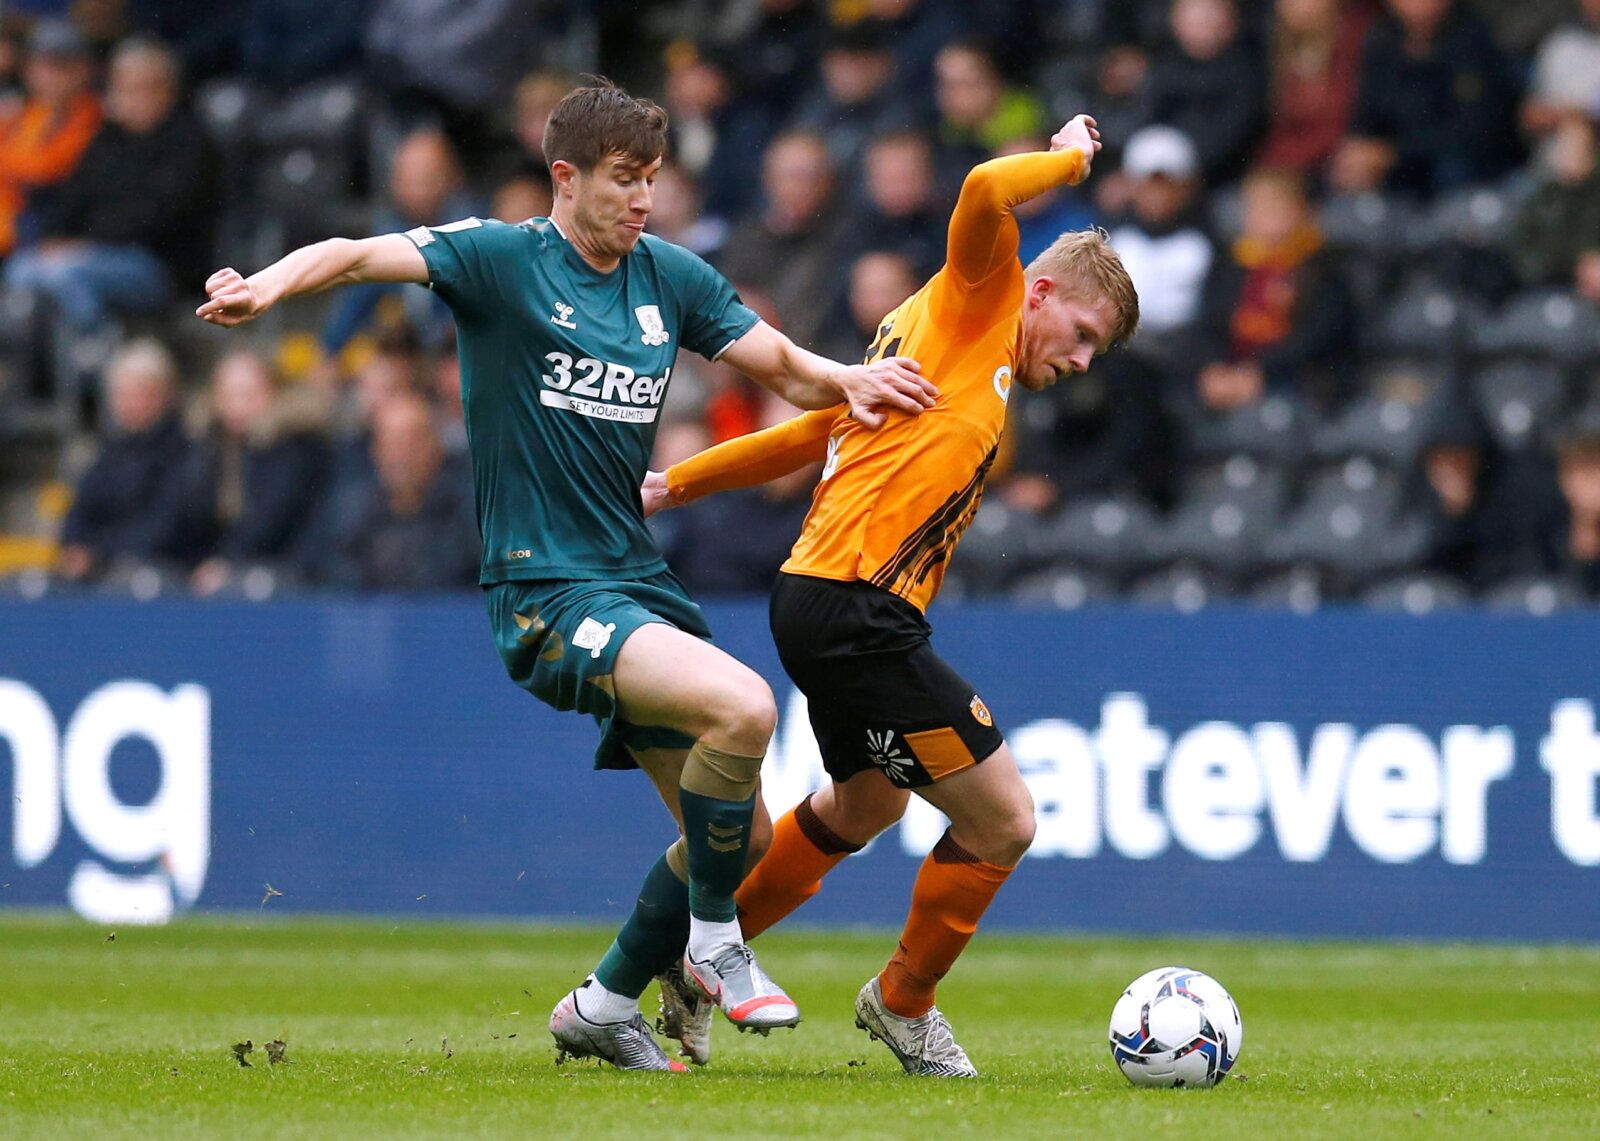 Soccer Football - Championship - Hull City v Middlesbrough - KCOM Stadium, Hull, Britain - October 2, 2021  Hull City's Andy Cannon in action with Middlesbrough's Paddy McNair  Action Images/Ed Sykes  EDITORIAL USE ONLY. No use with unauthorized audio, video, data, fixture lists, club/league logos or 